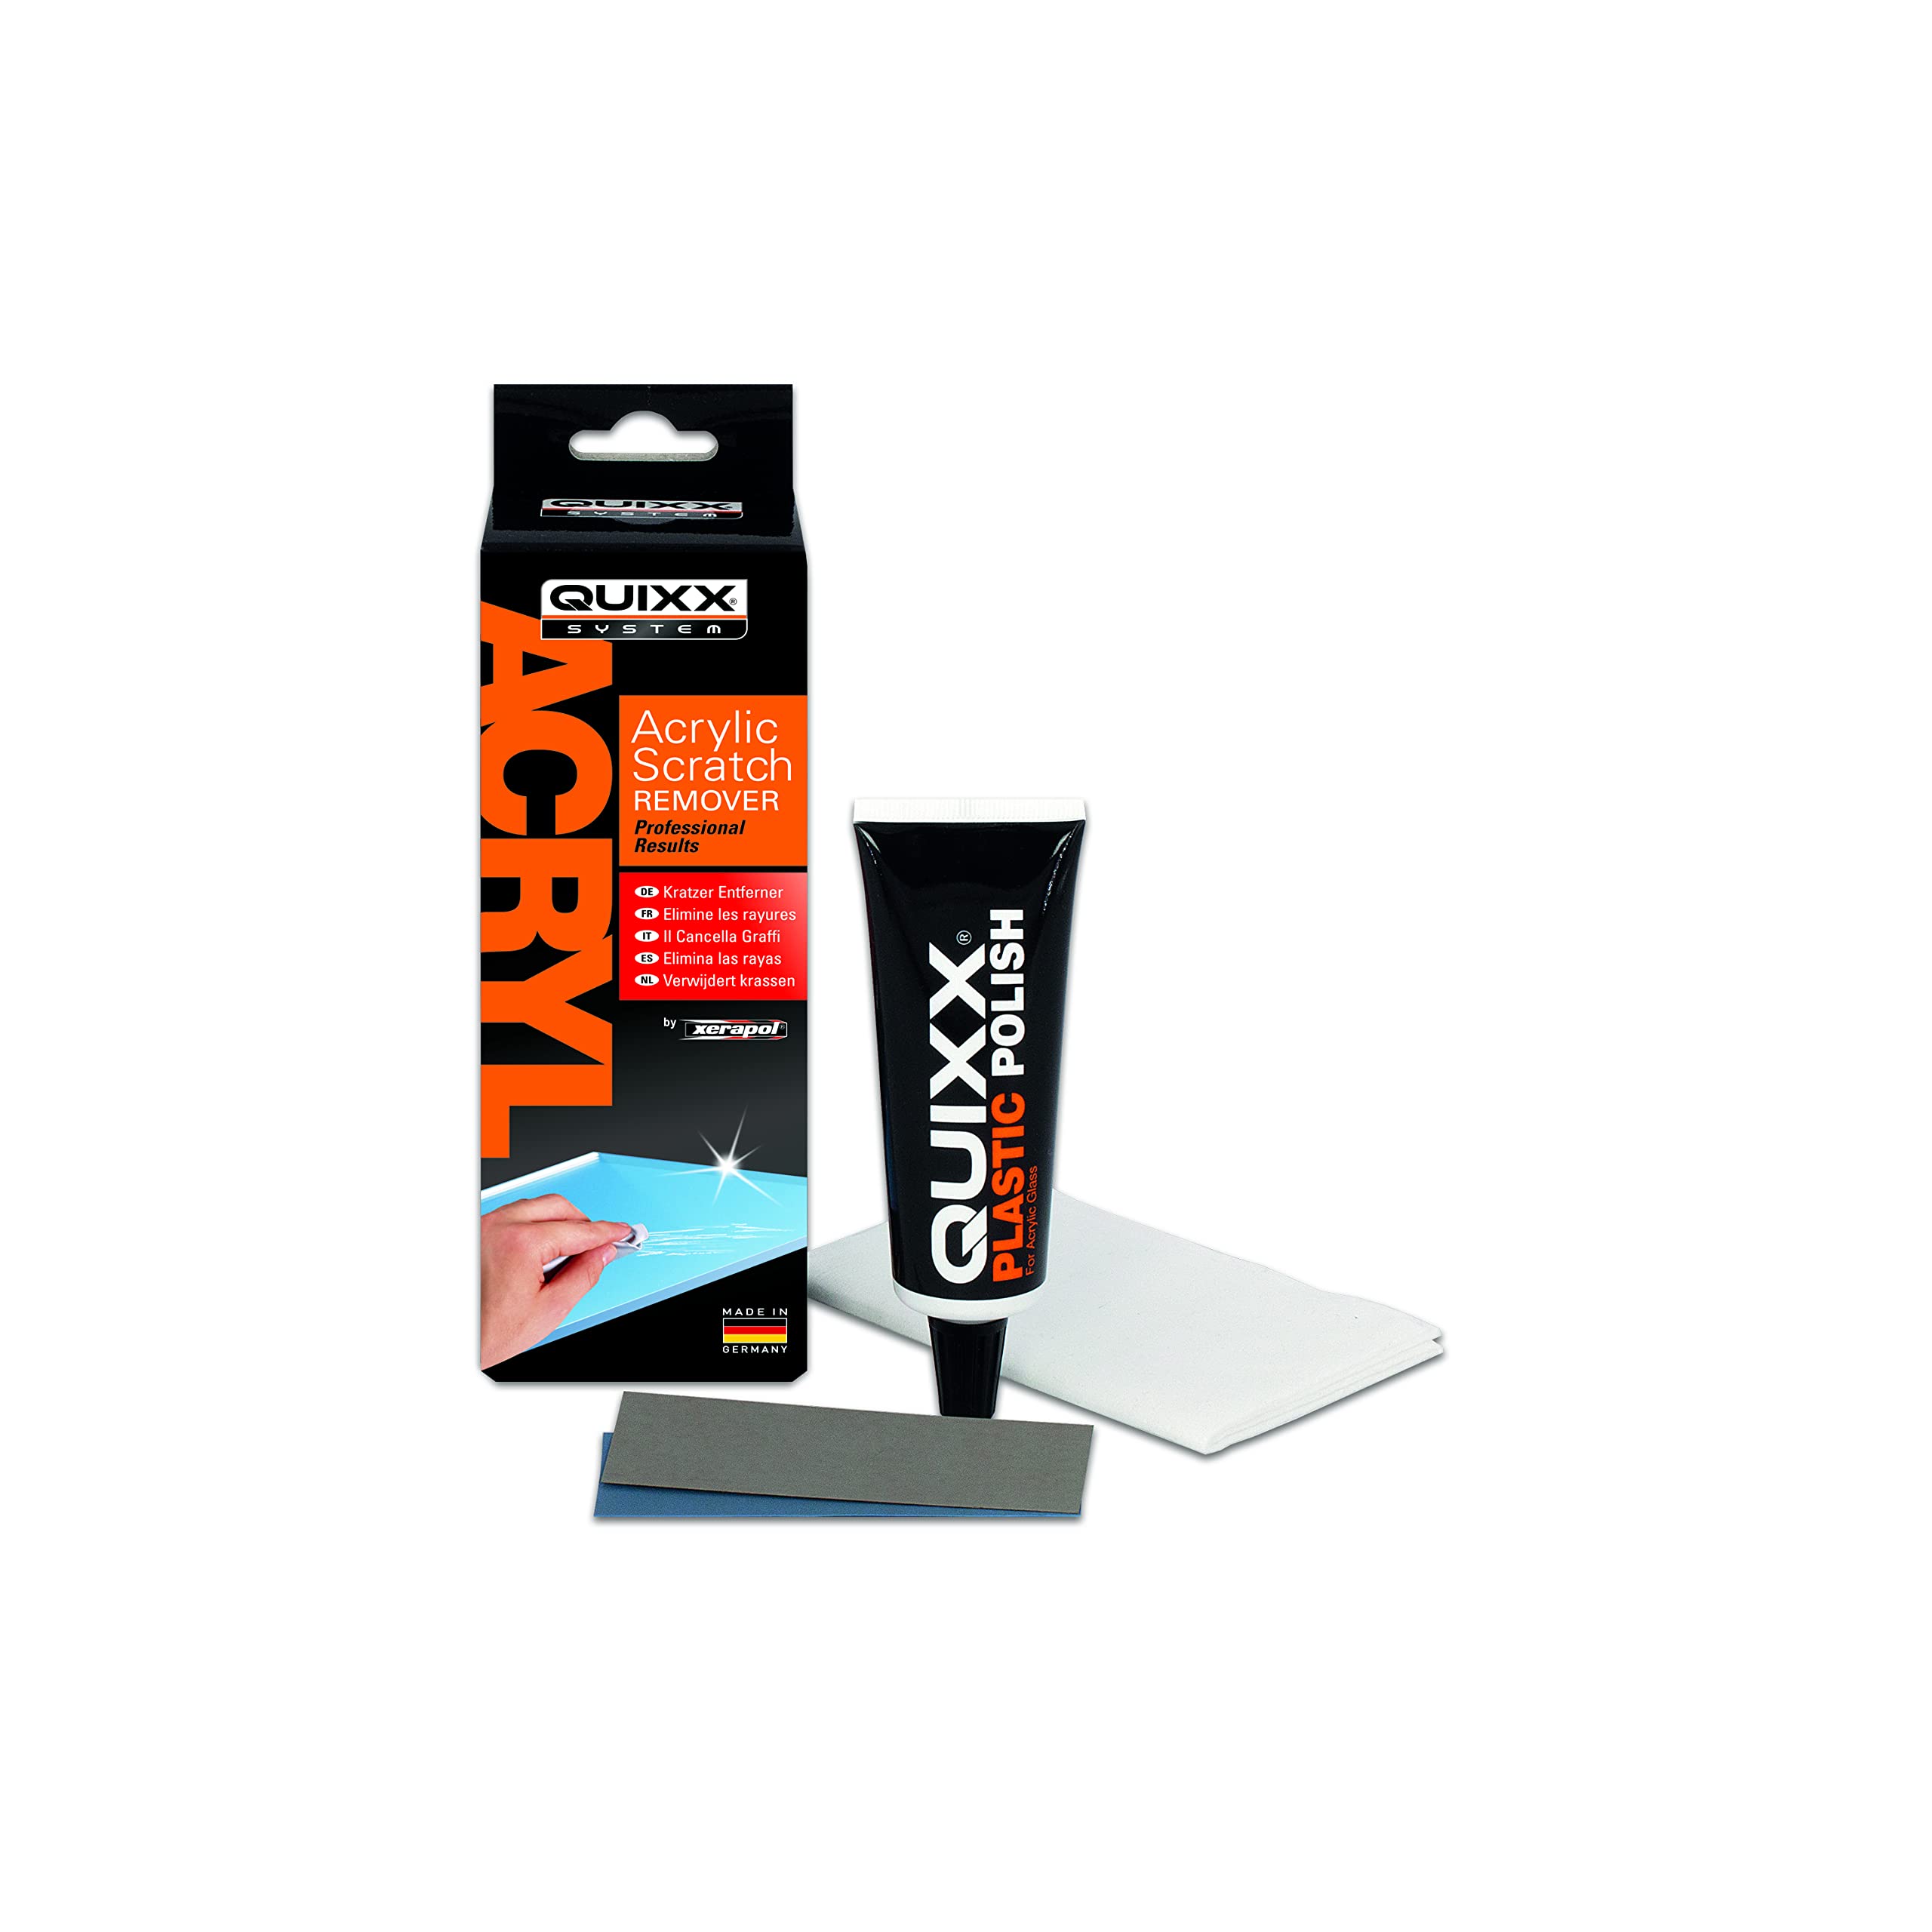 Quixx QUIXX 10003 Acrylic Scratch Remover - Removes Scratches From clear  Acrylic and Plexiglas Surfaces On cars, Motorcycles, caravans